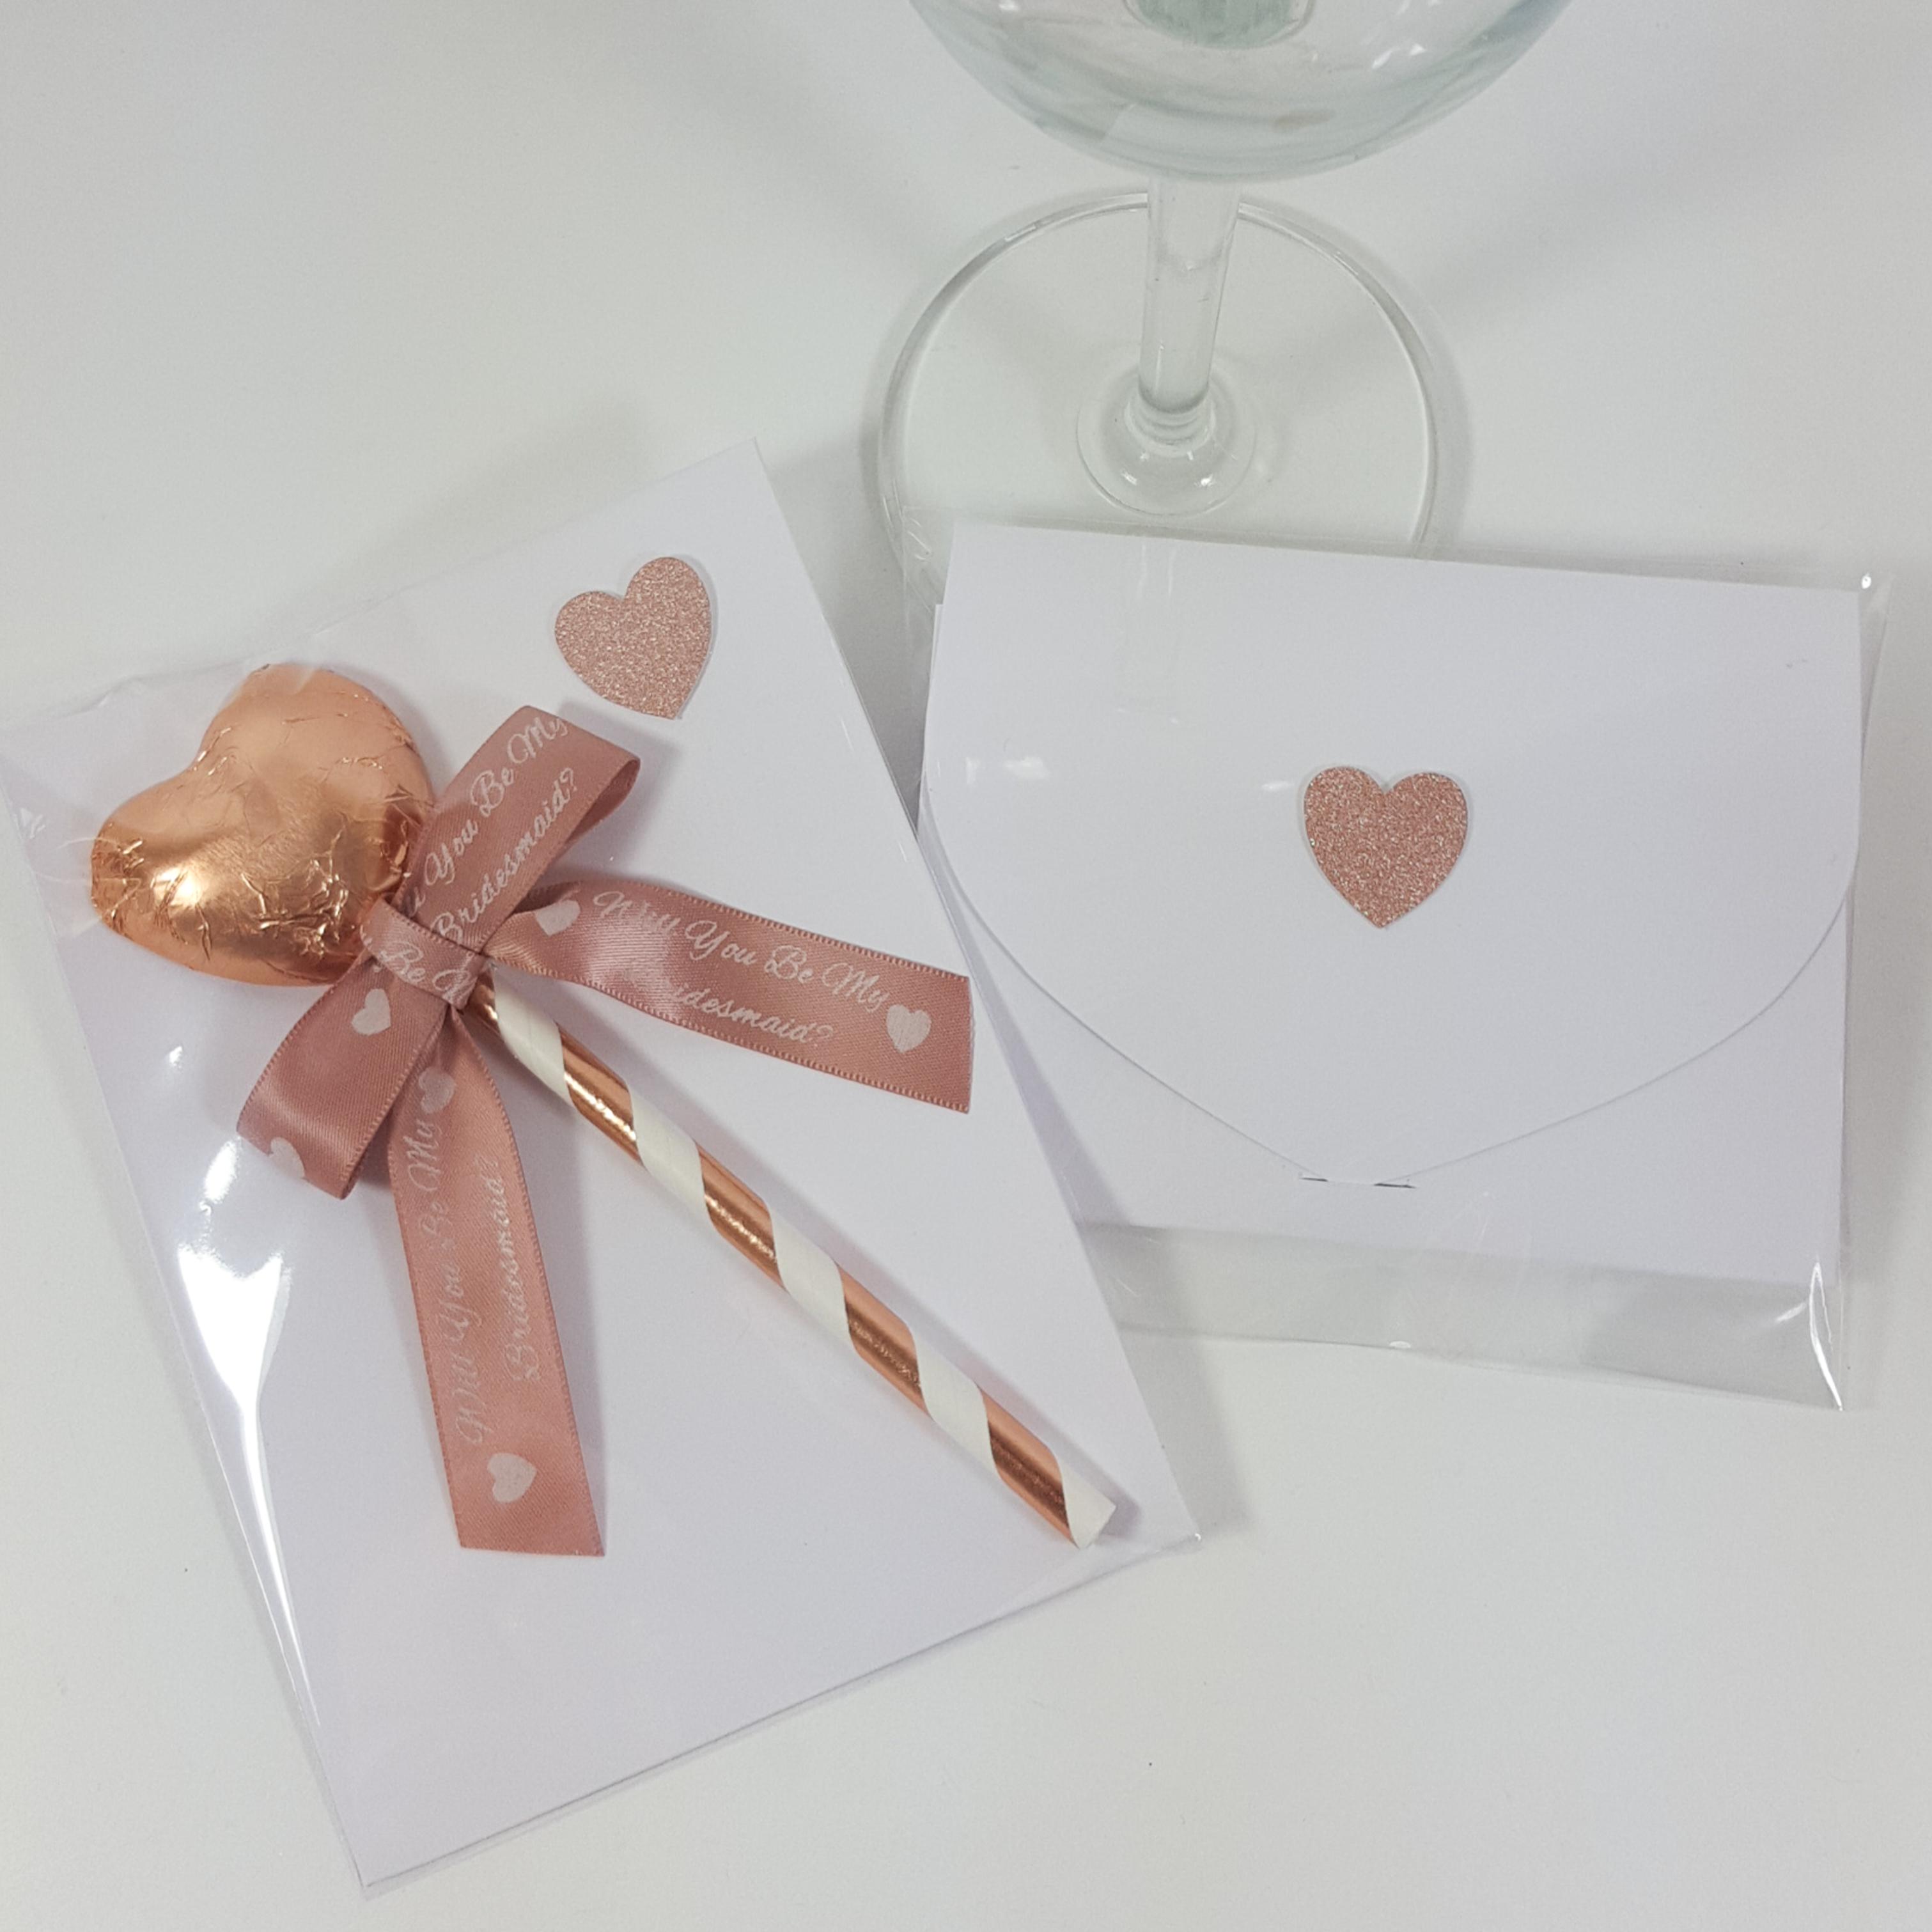 Will you be my bridesmaid lolly and bracelet